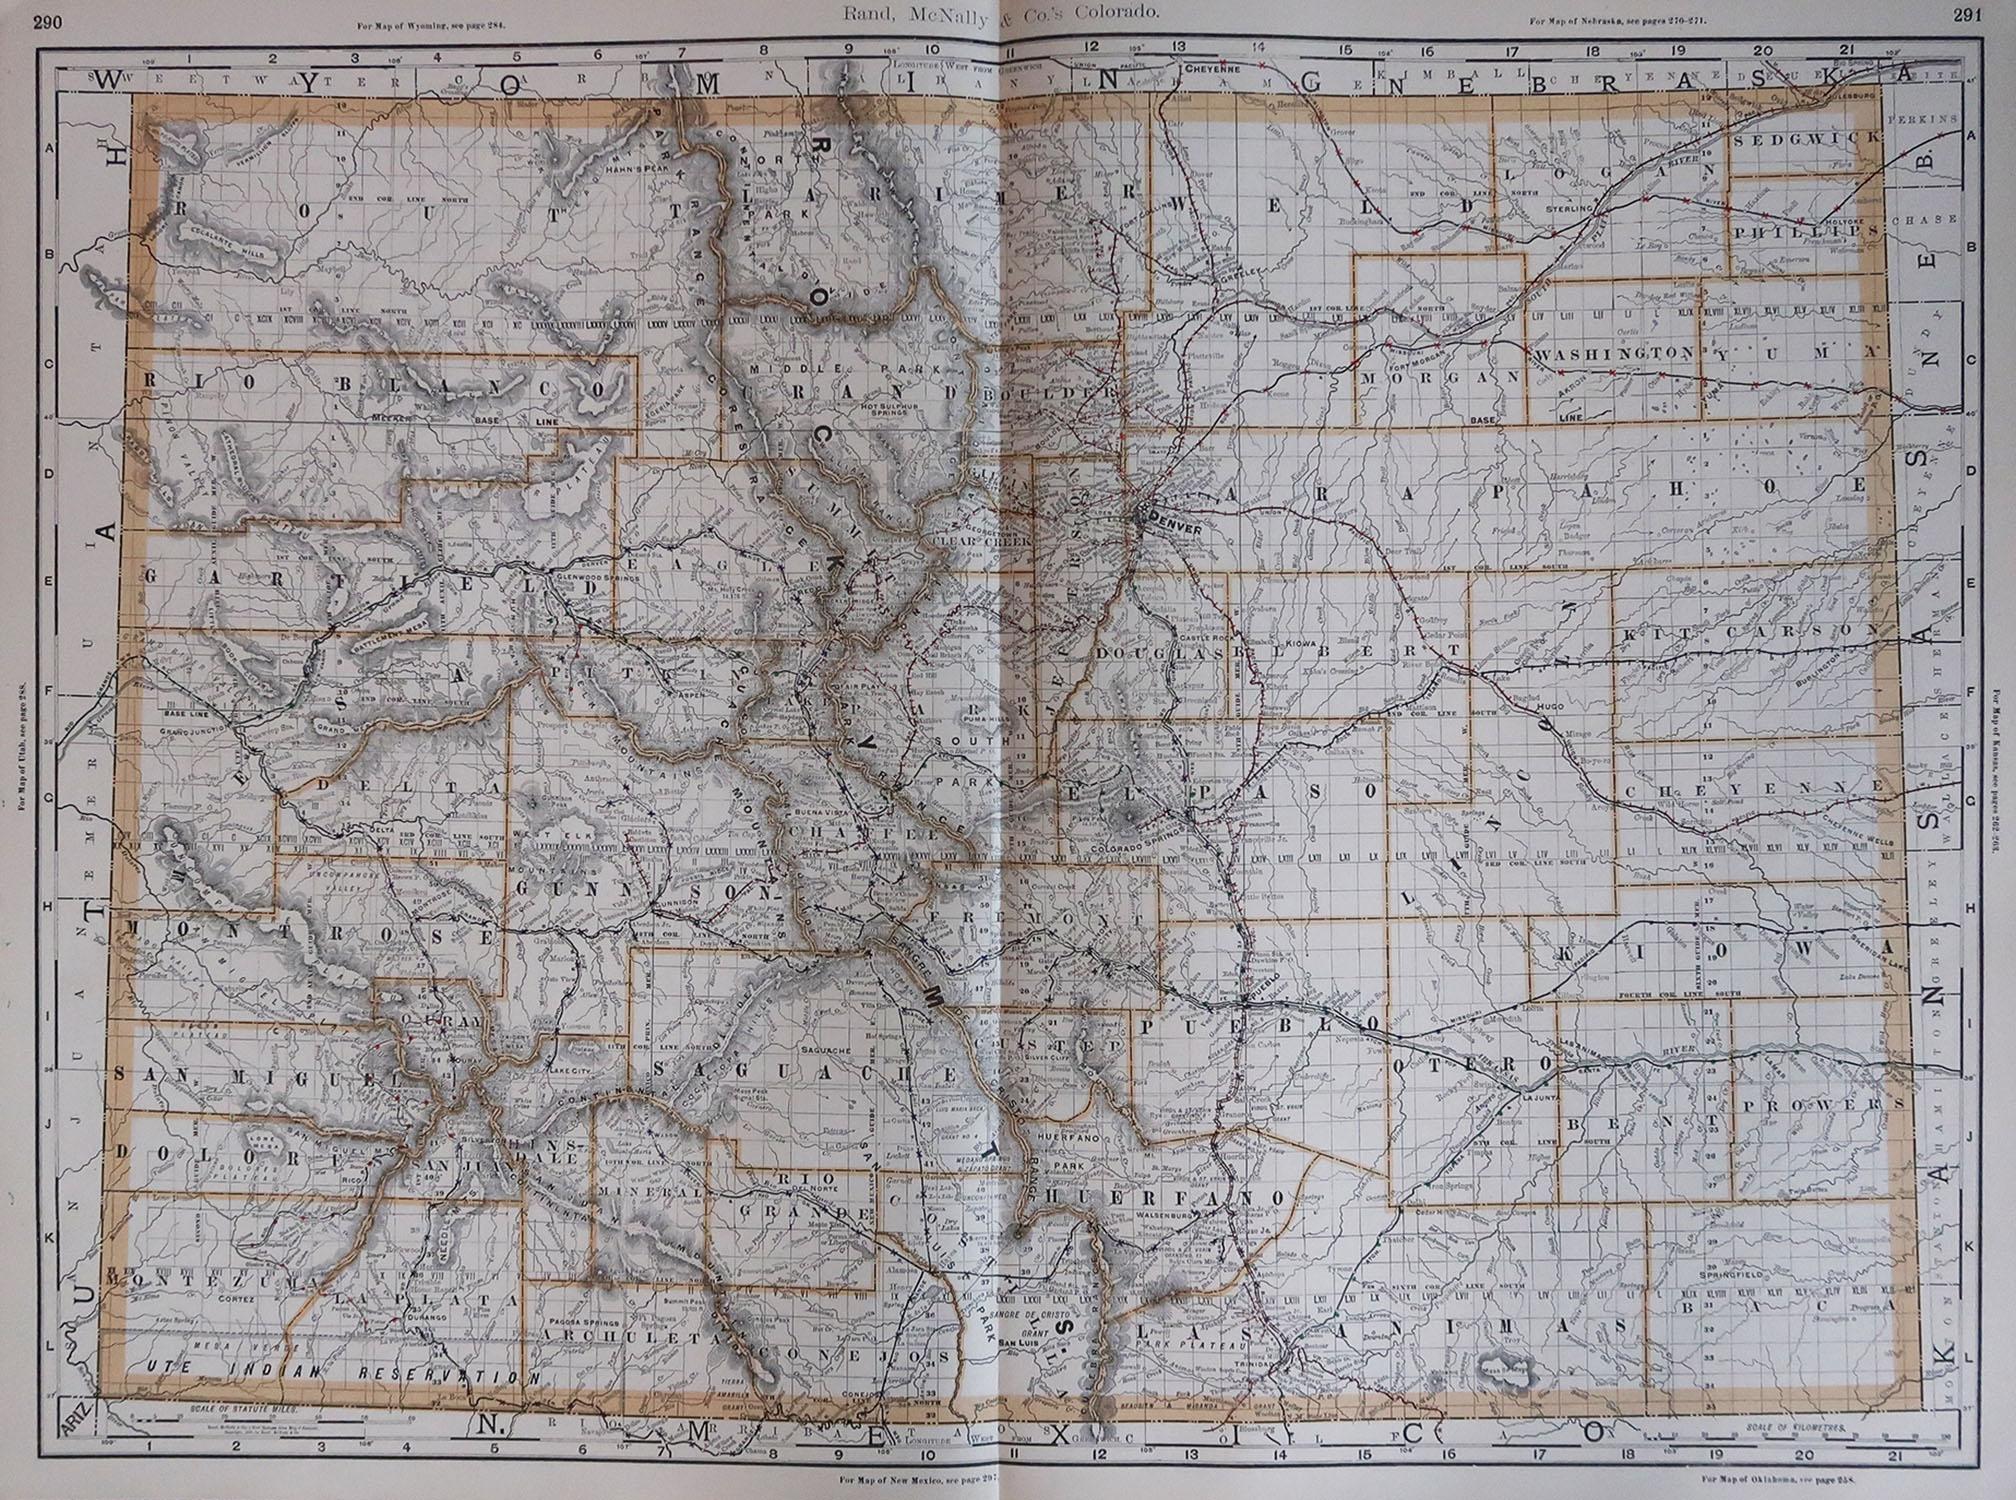 Fabulous map of Colorado

Original color

By Rand, McNally & Co.

Published, 1894

Unframed

Free shipping.